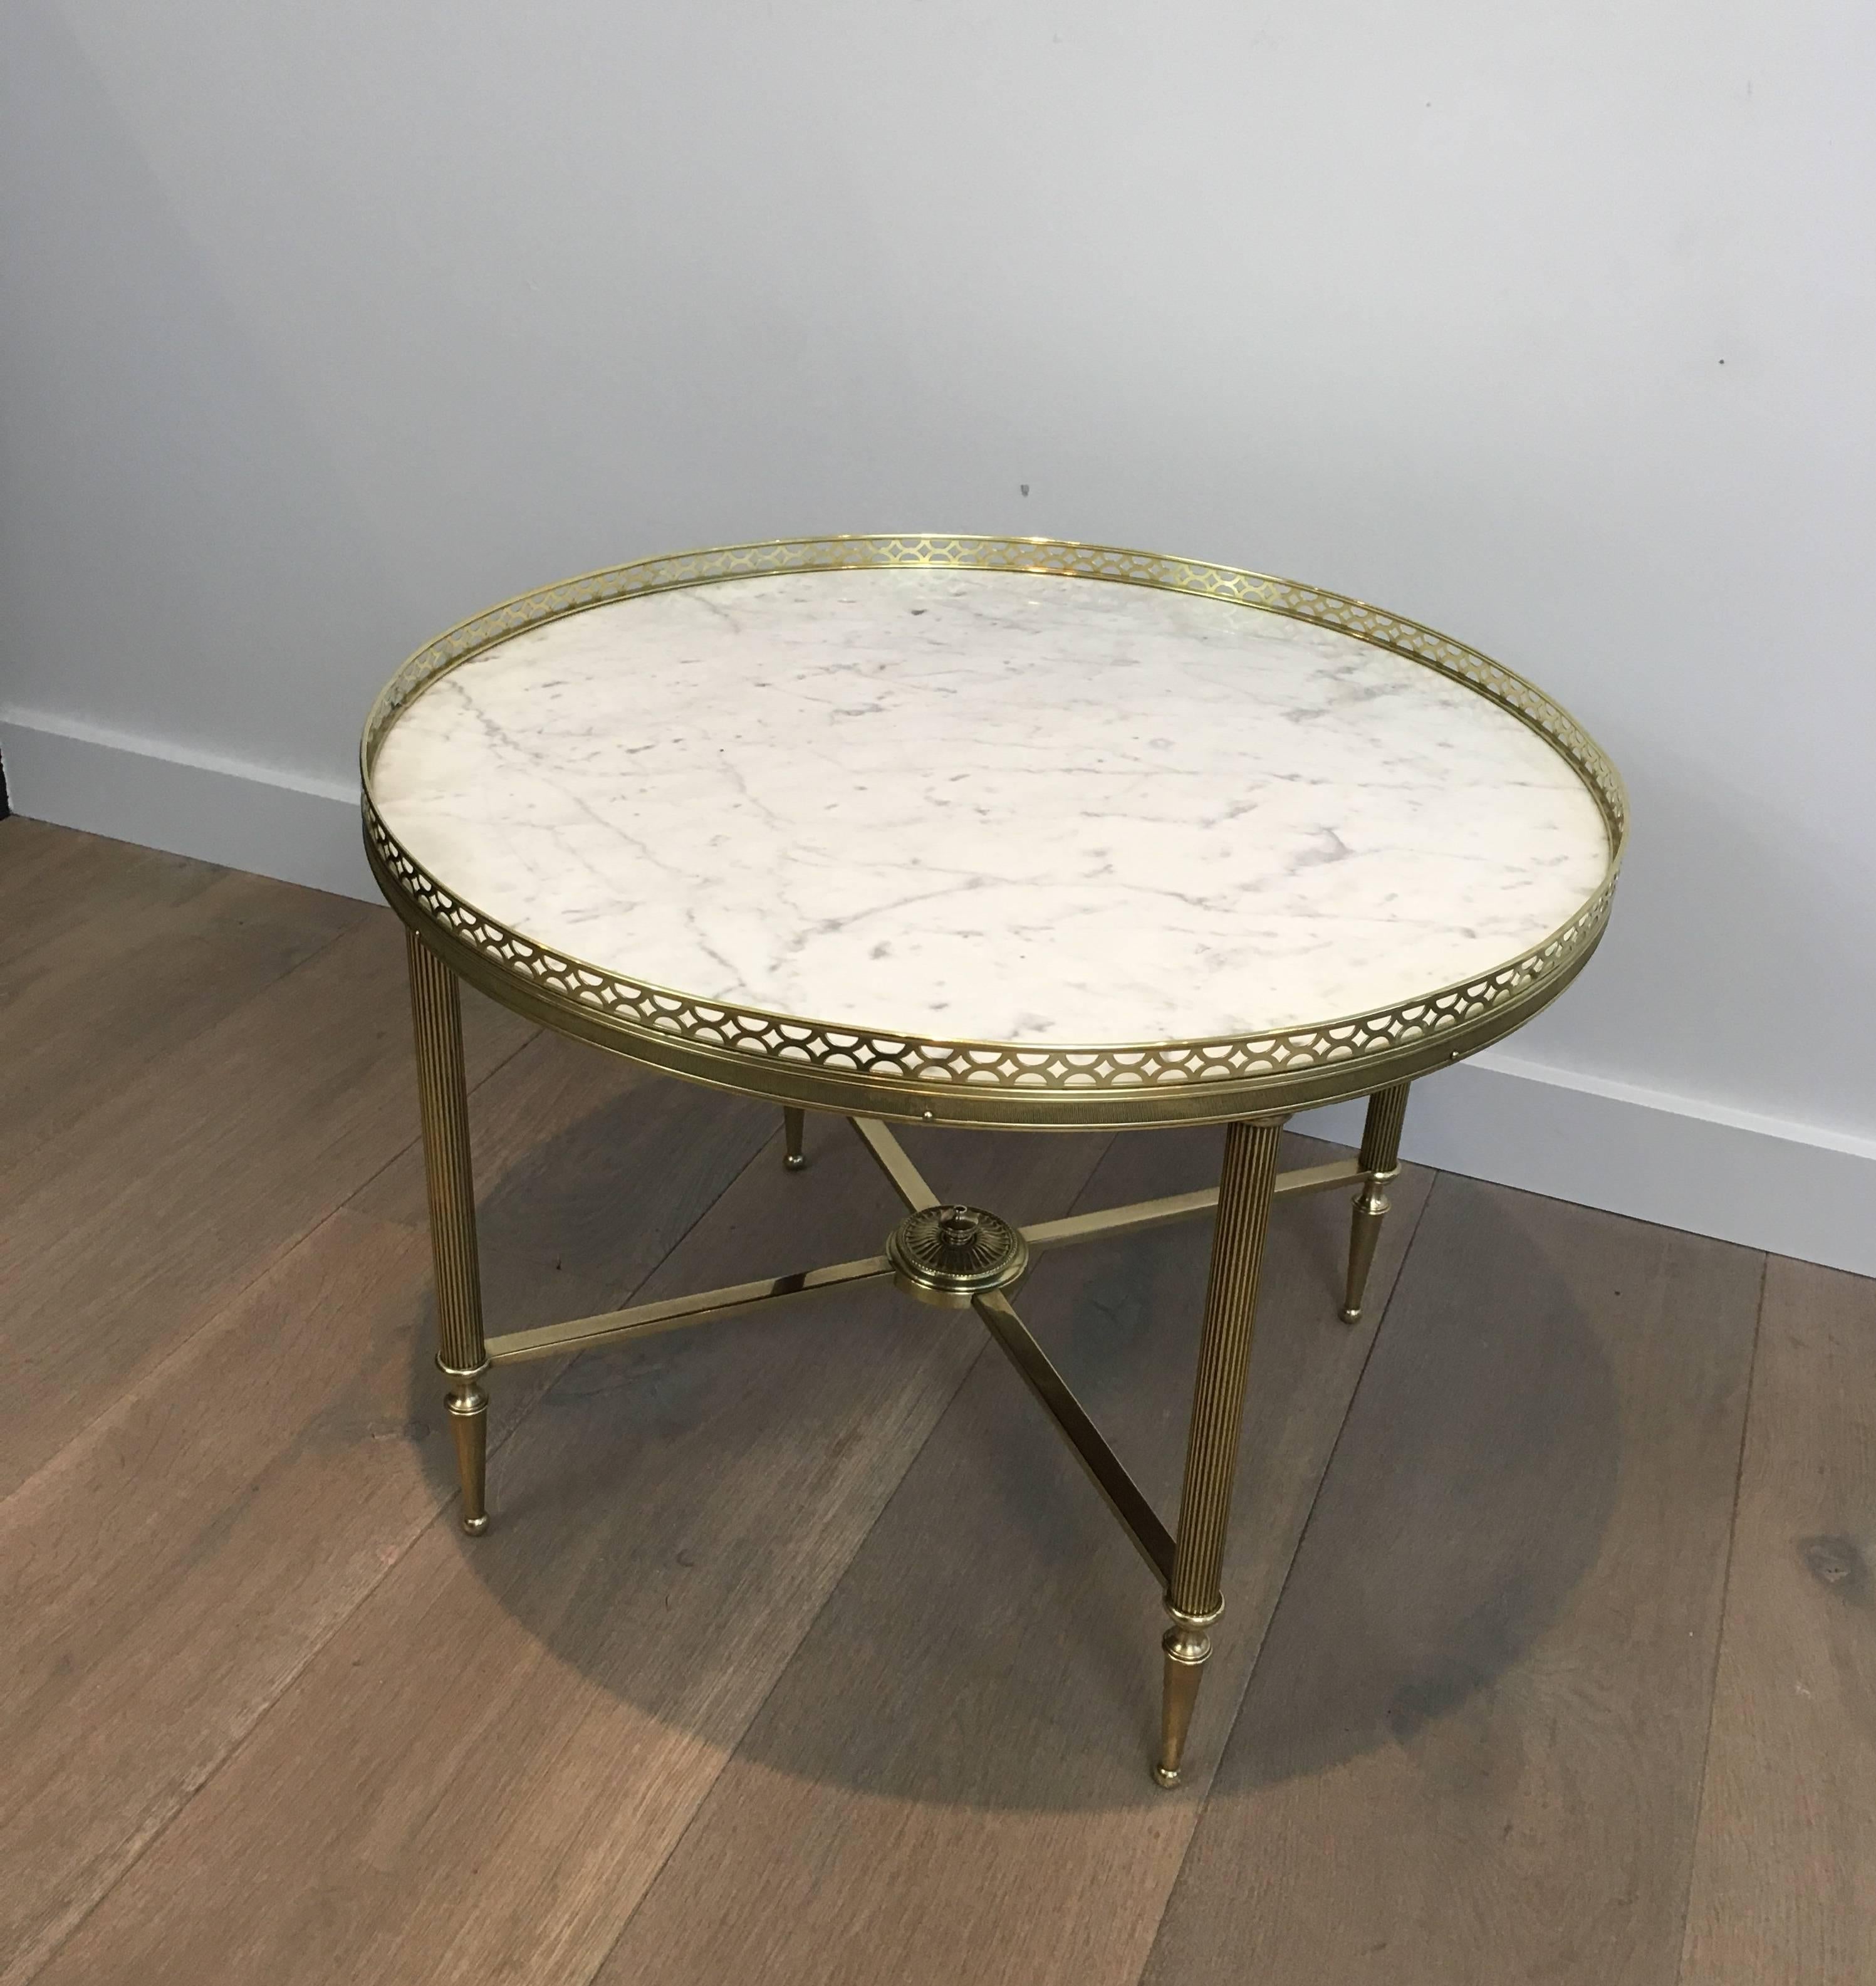 Mid-20th Century Pair of Brass End Tables with White Marble Tops by Maison Jansen